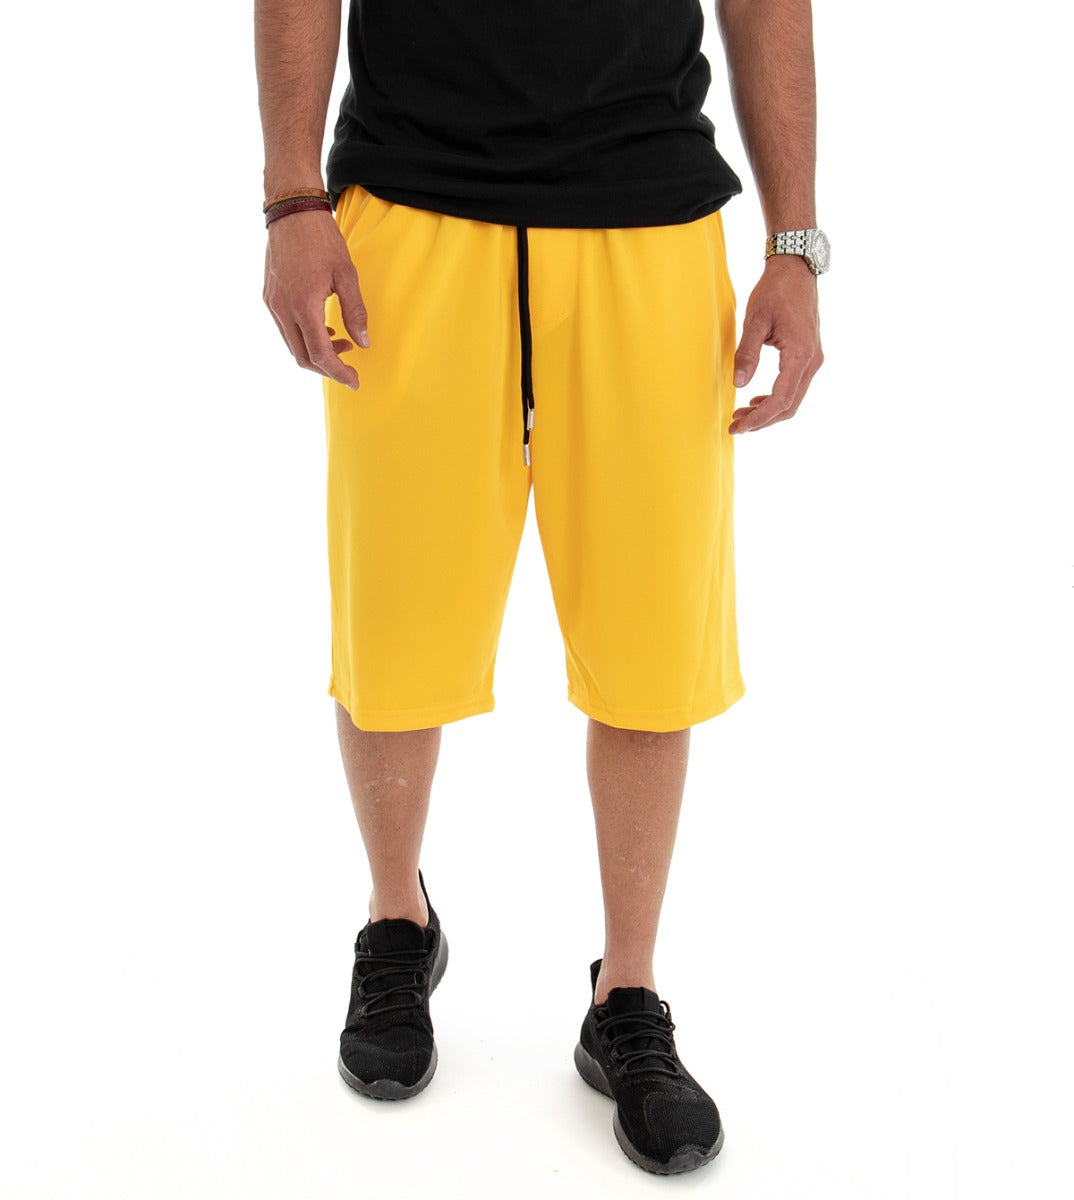 Men's Bermuda Shorts Oversized Solid Color Yellow GIOSAL-PC1471A